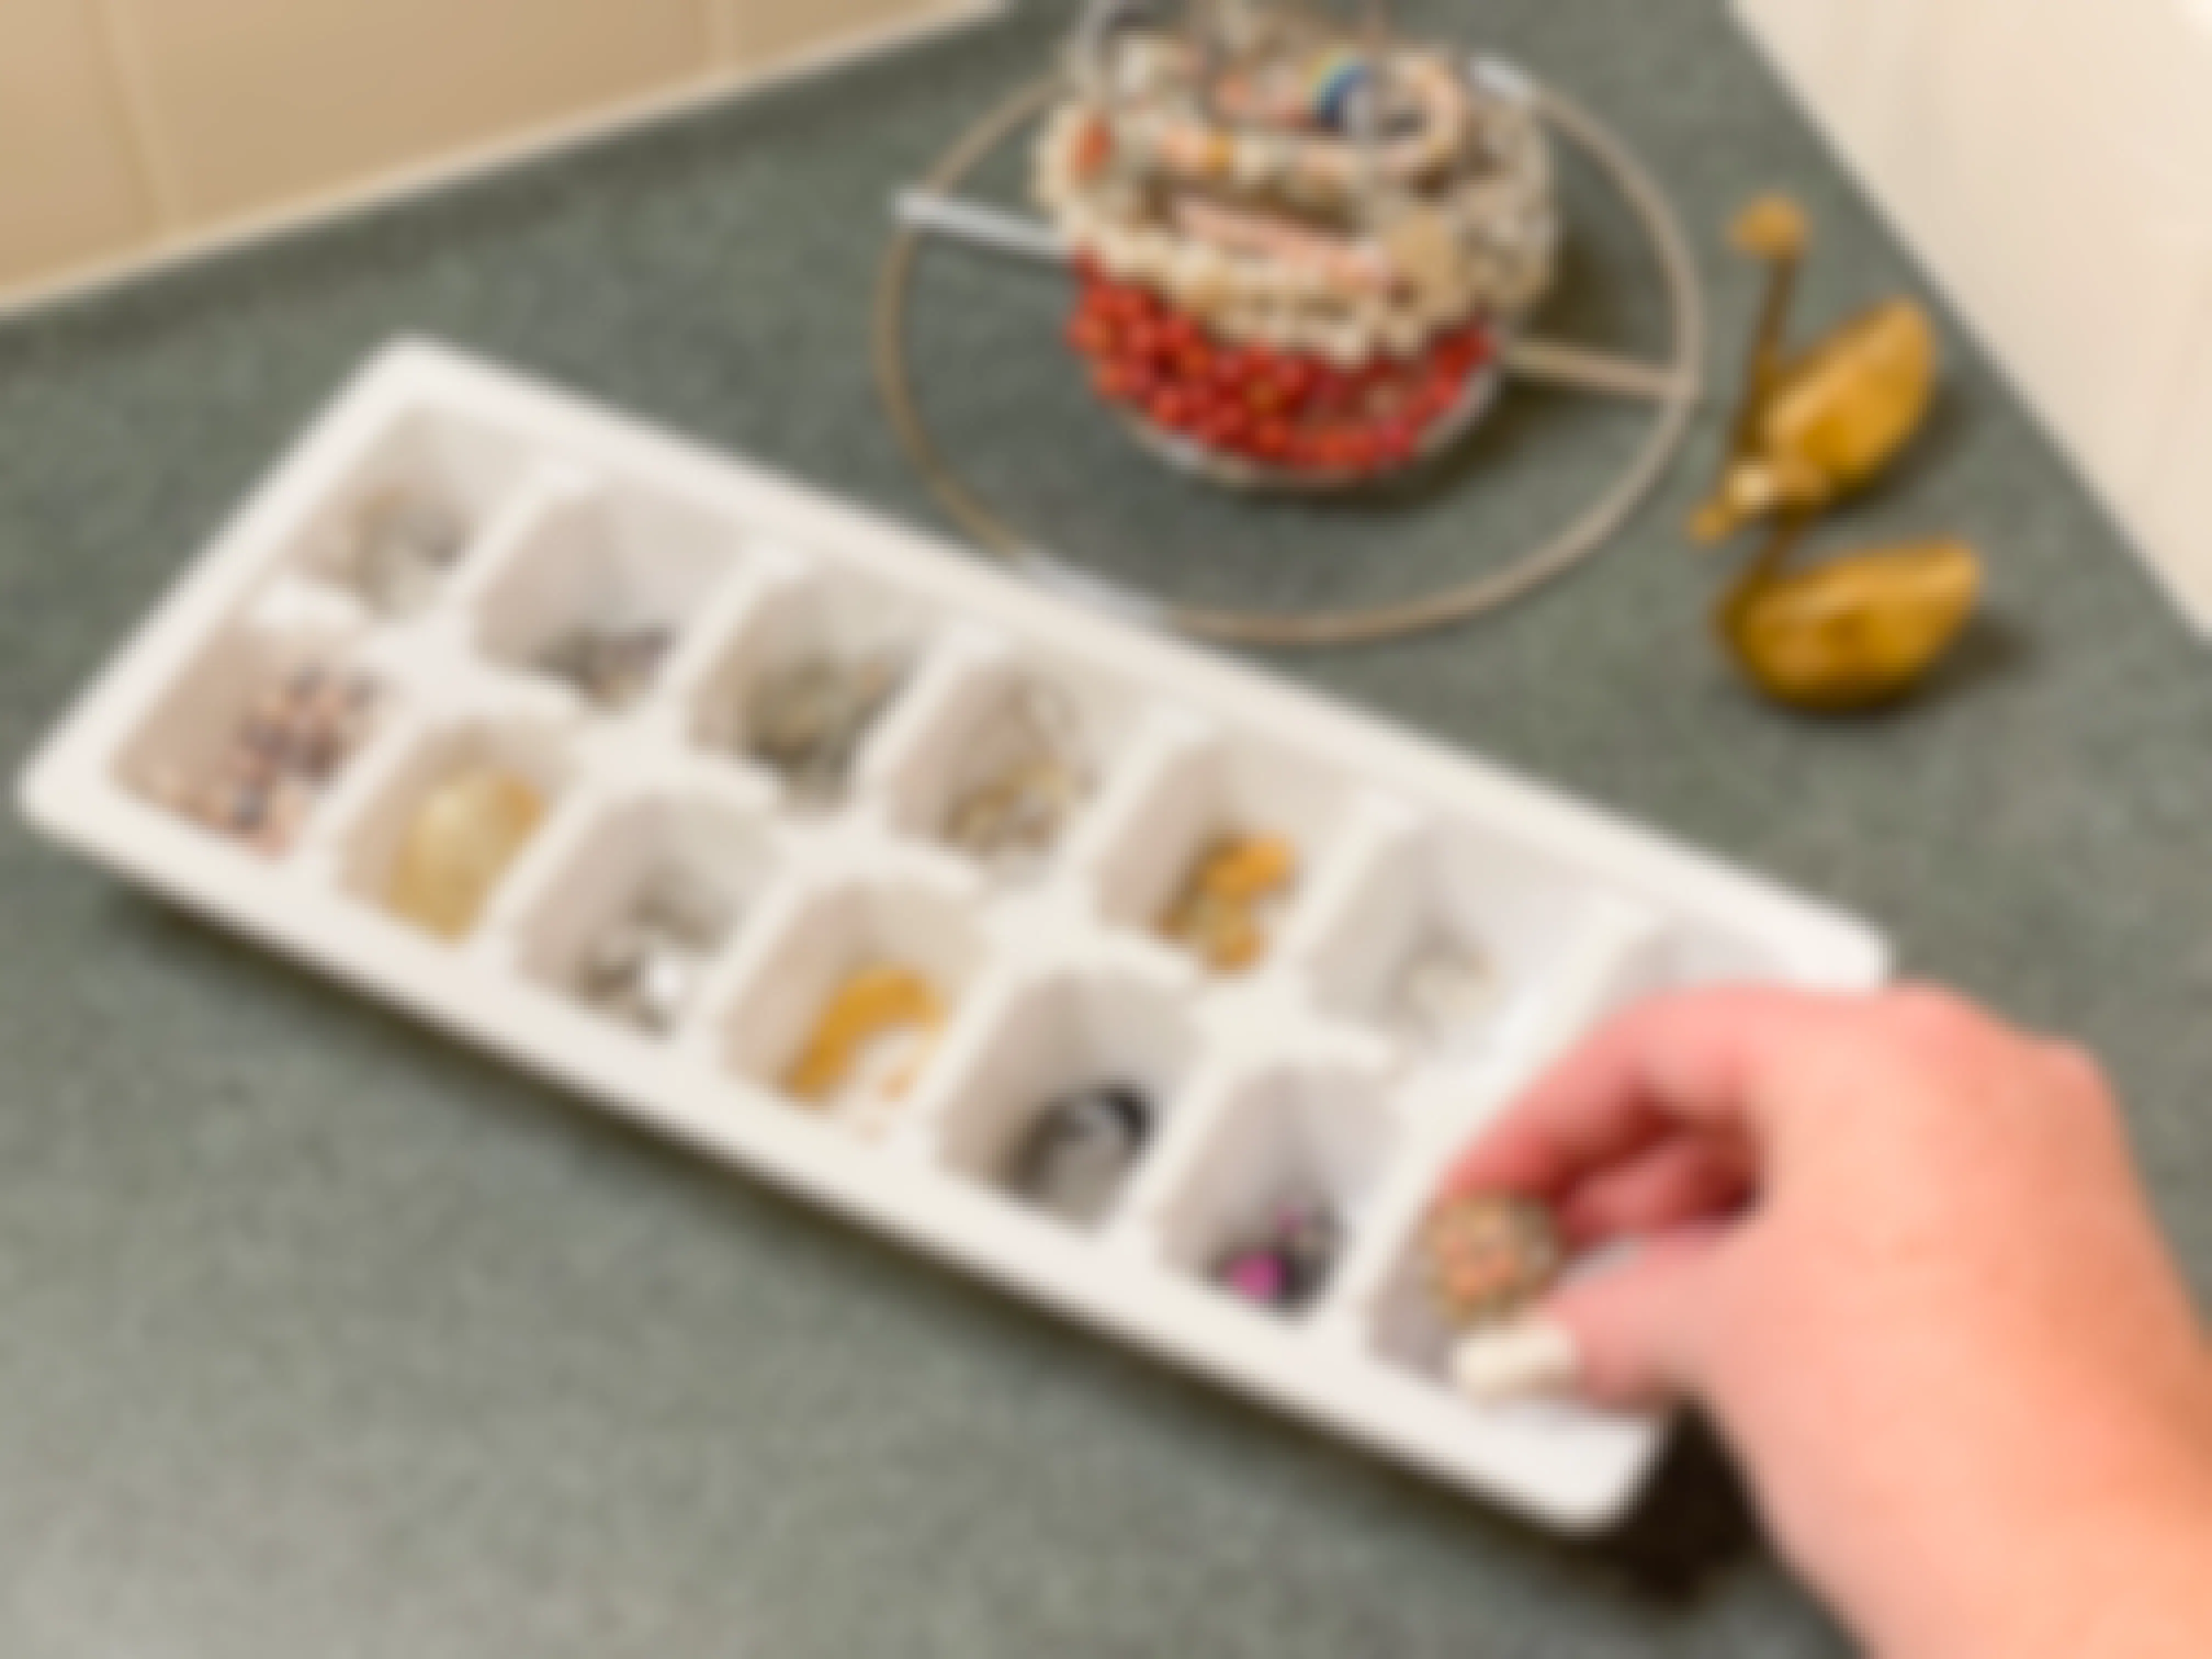 using an ice tray for jewelry storage